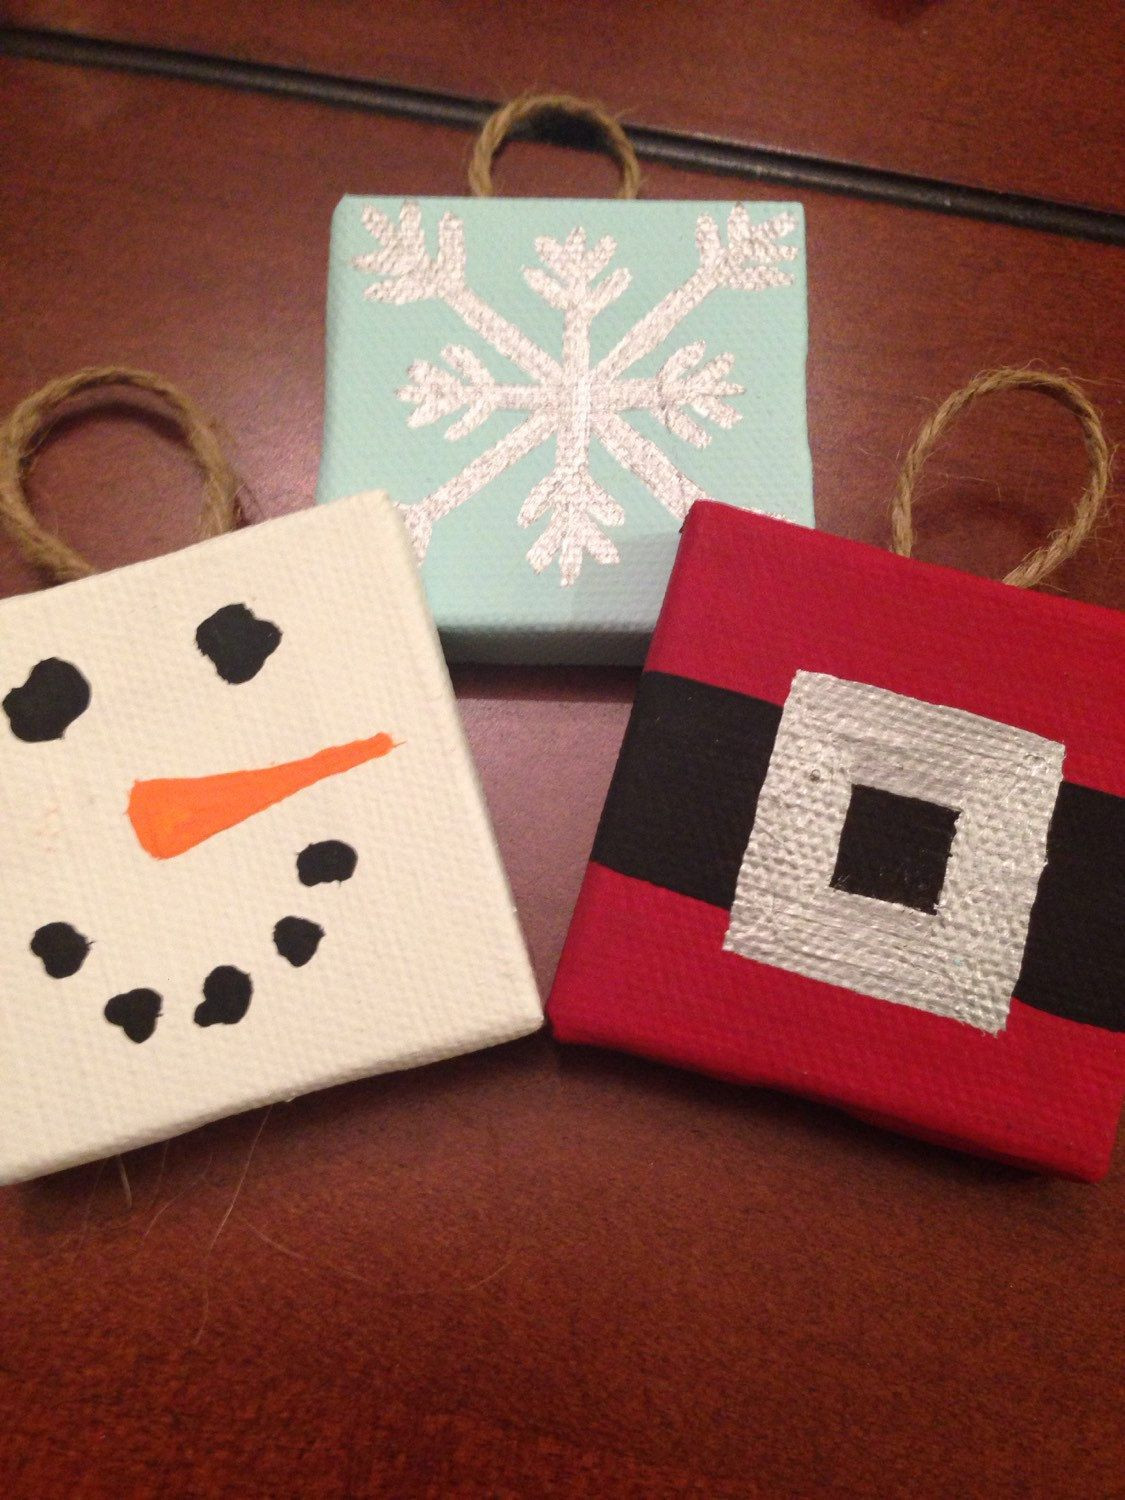 Canvas Crafts For Toddlers
 Handpainted mini canvas Christmas Ornaments by OhmGrown on